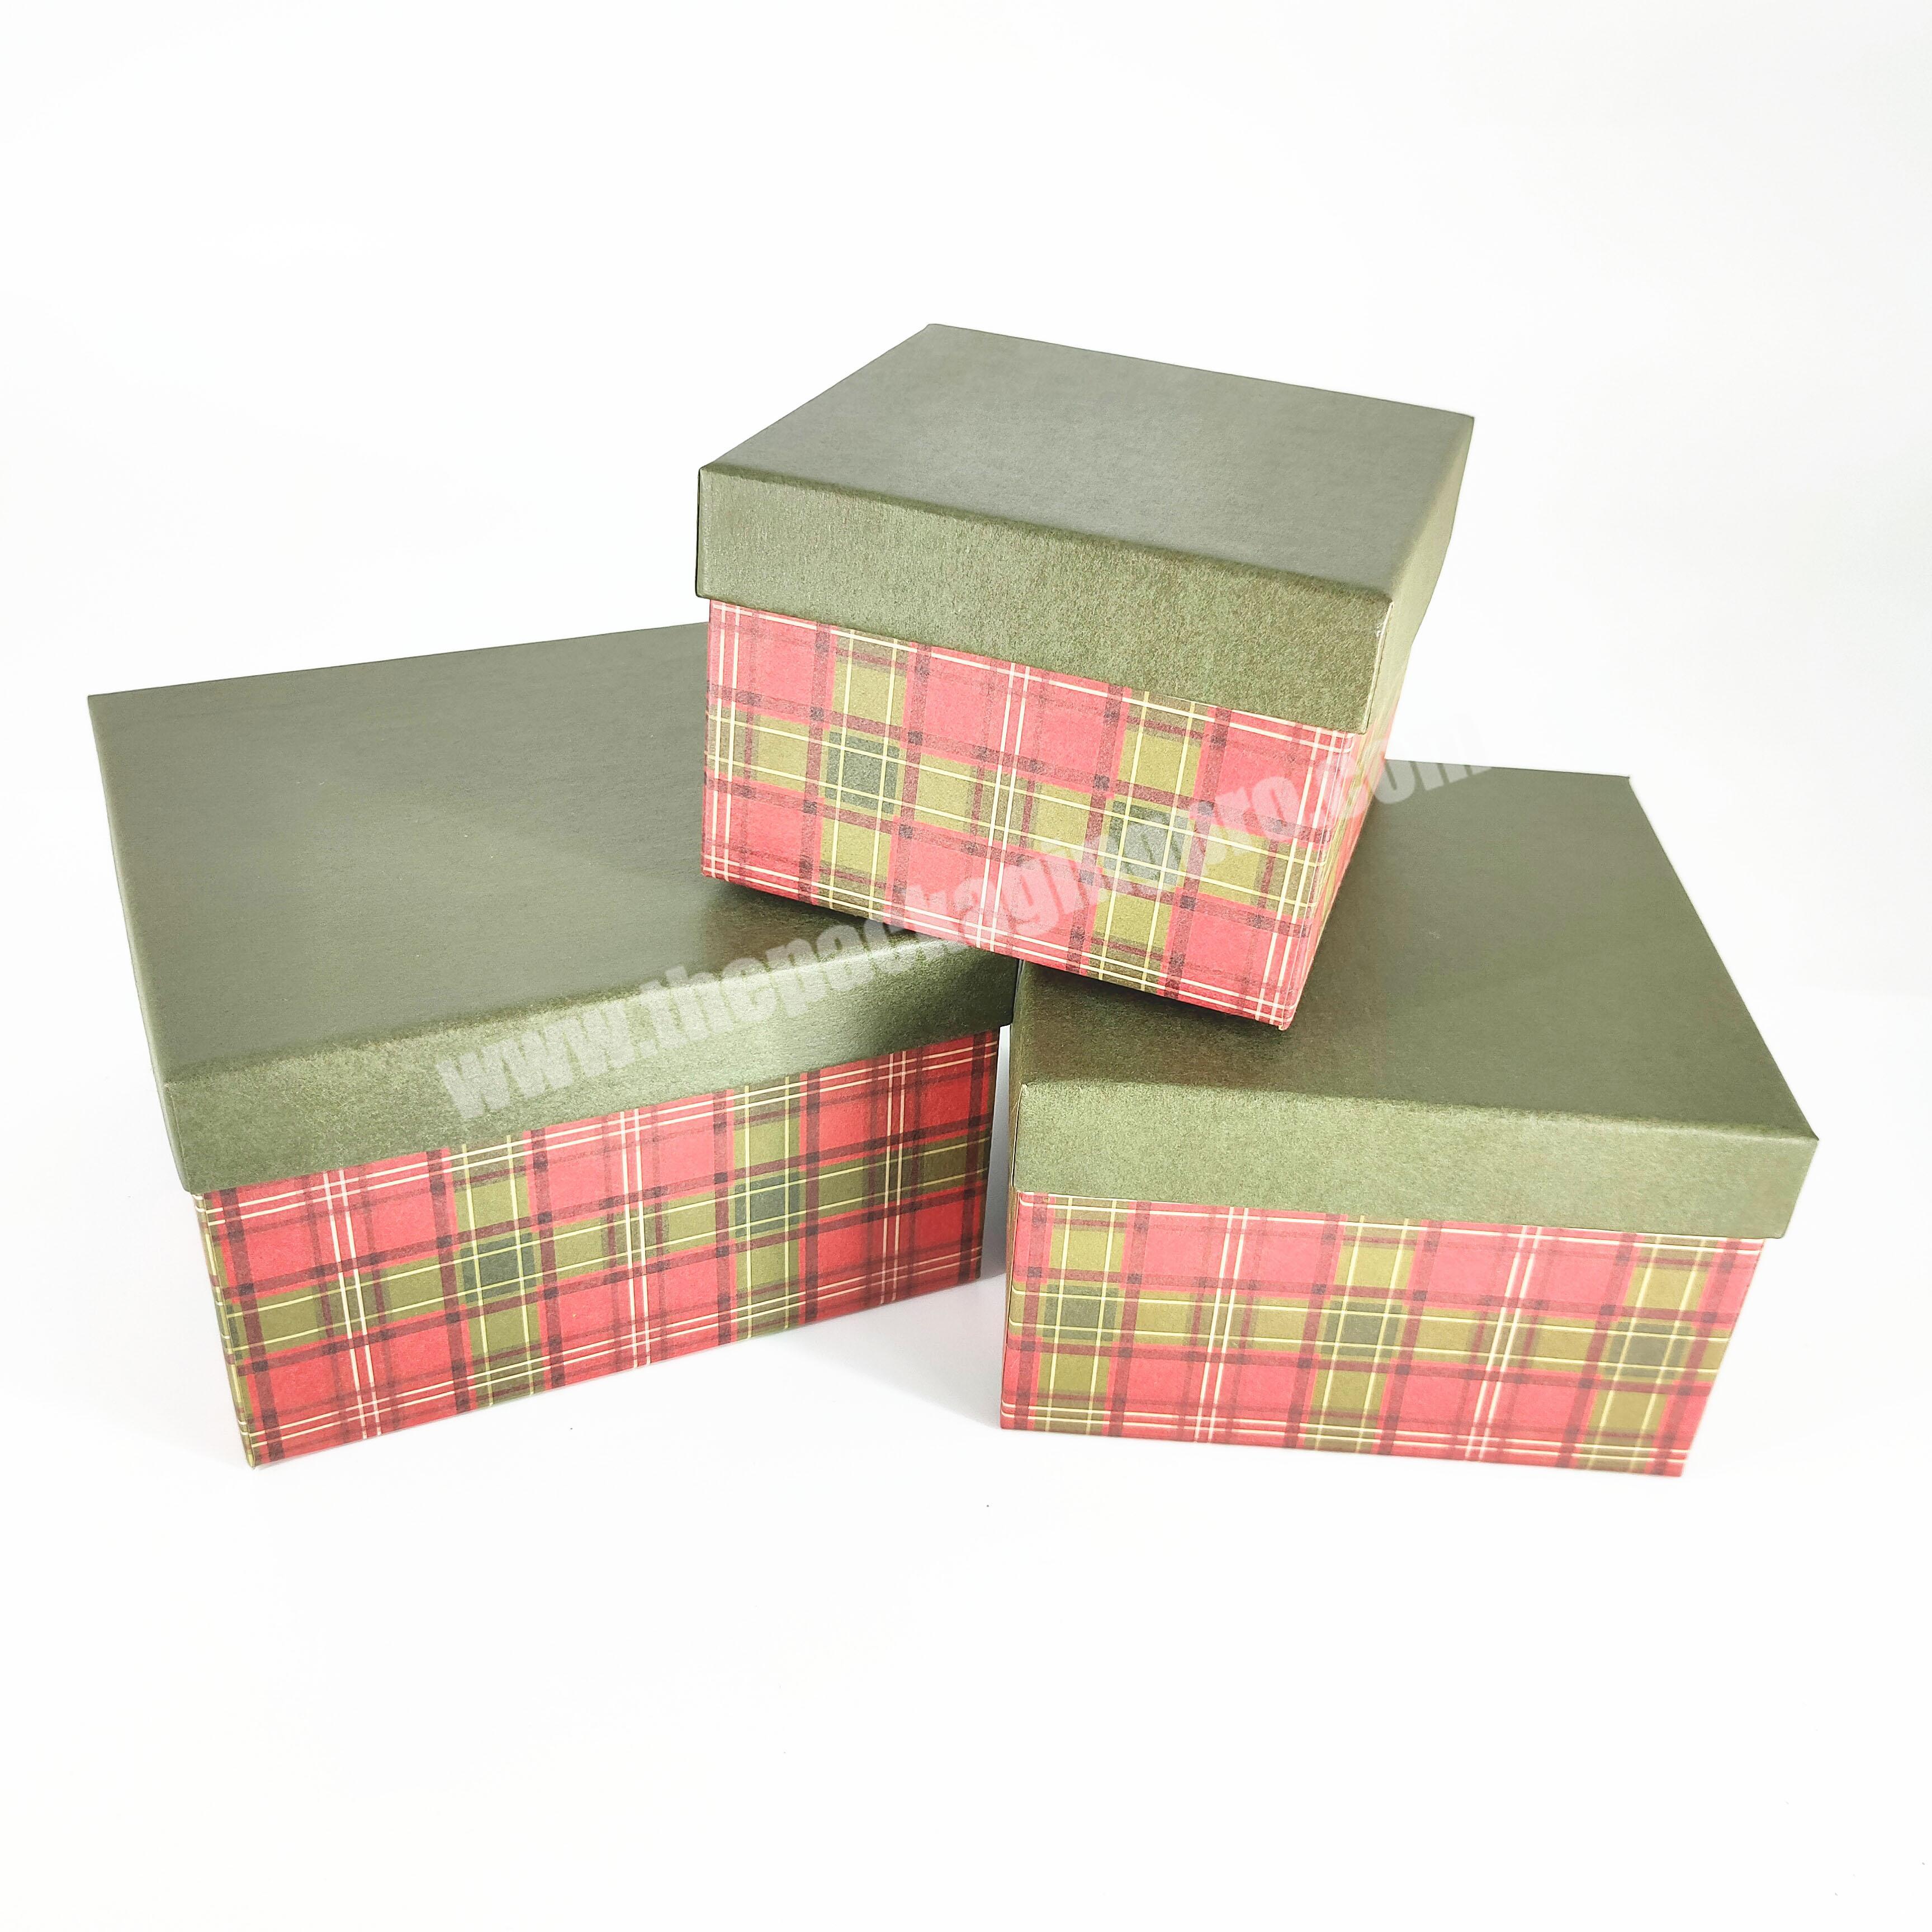 custom packaging gift red lattice pattern boxes